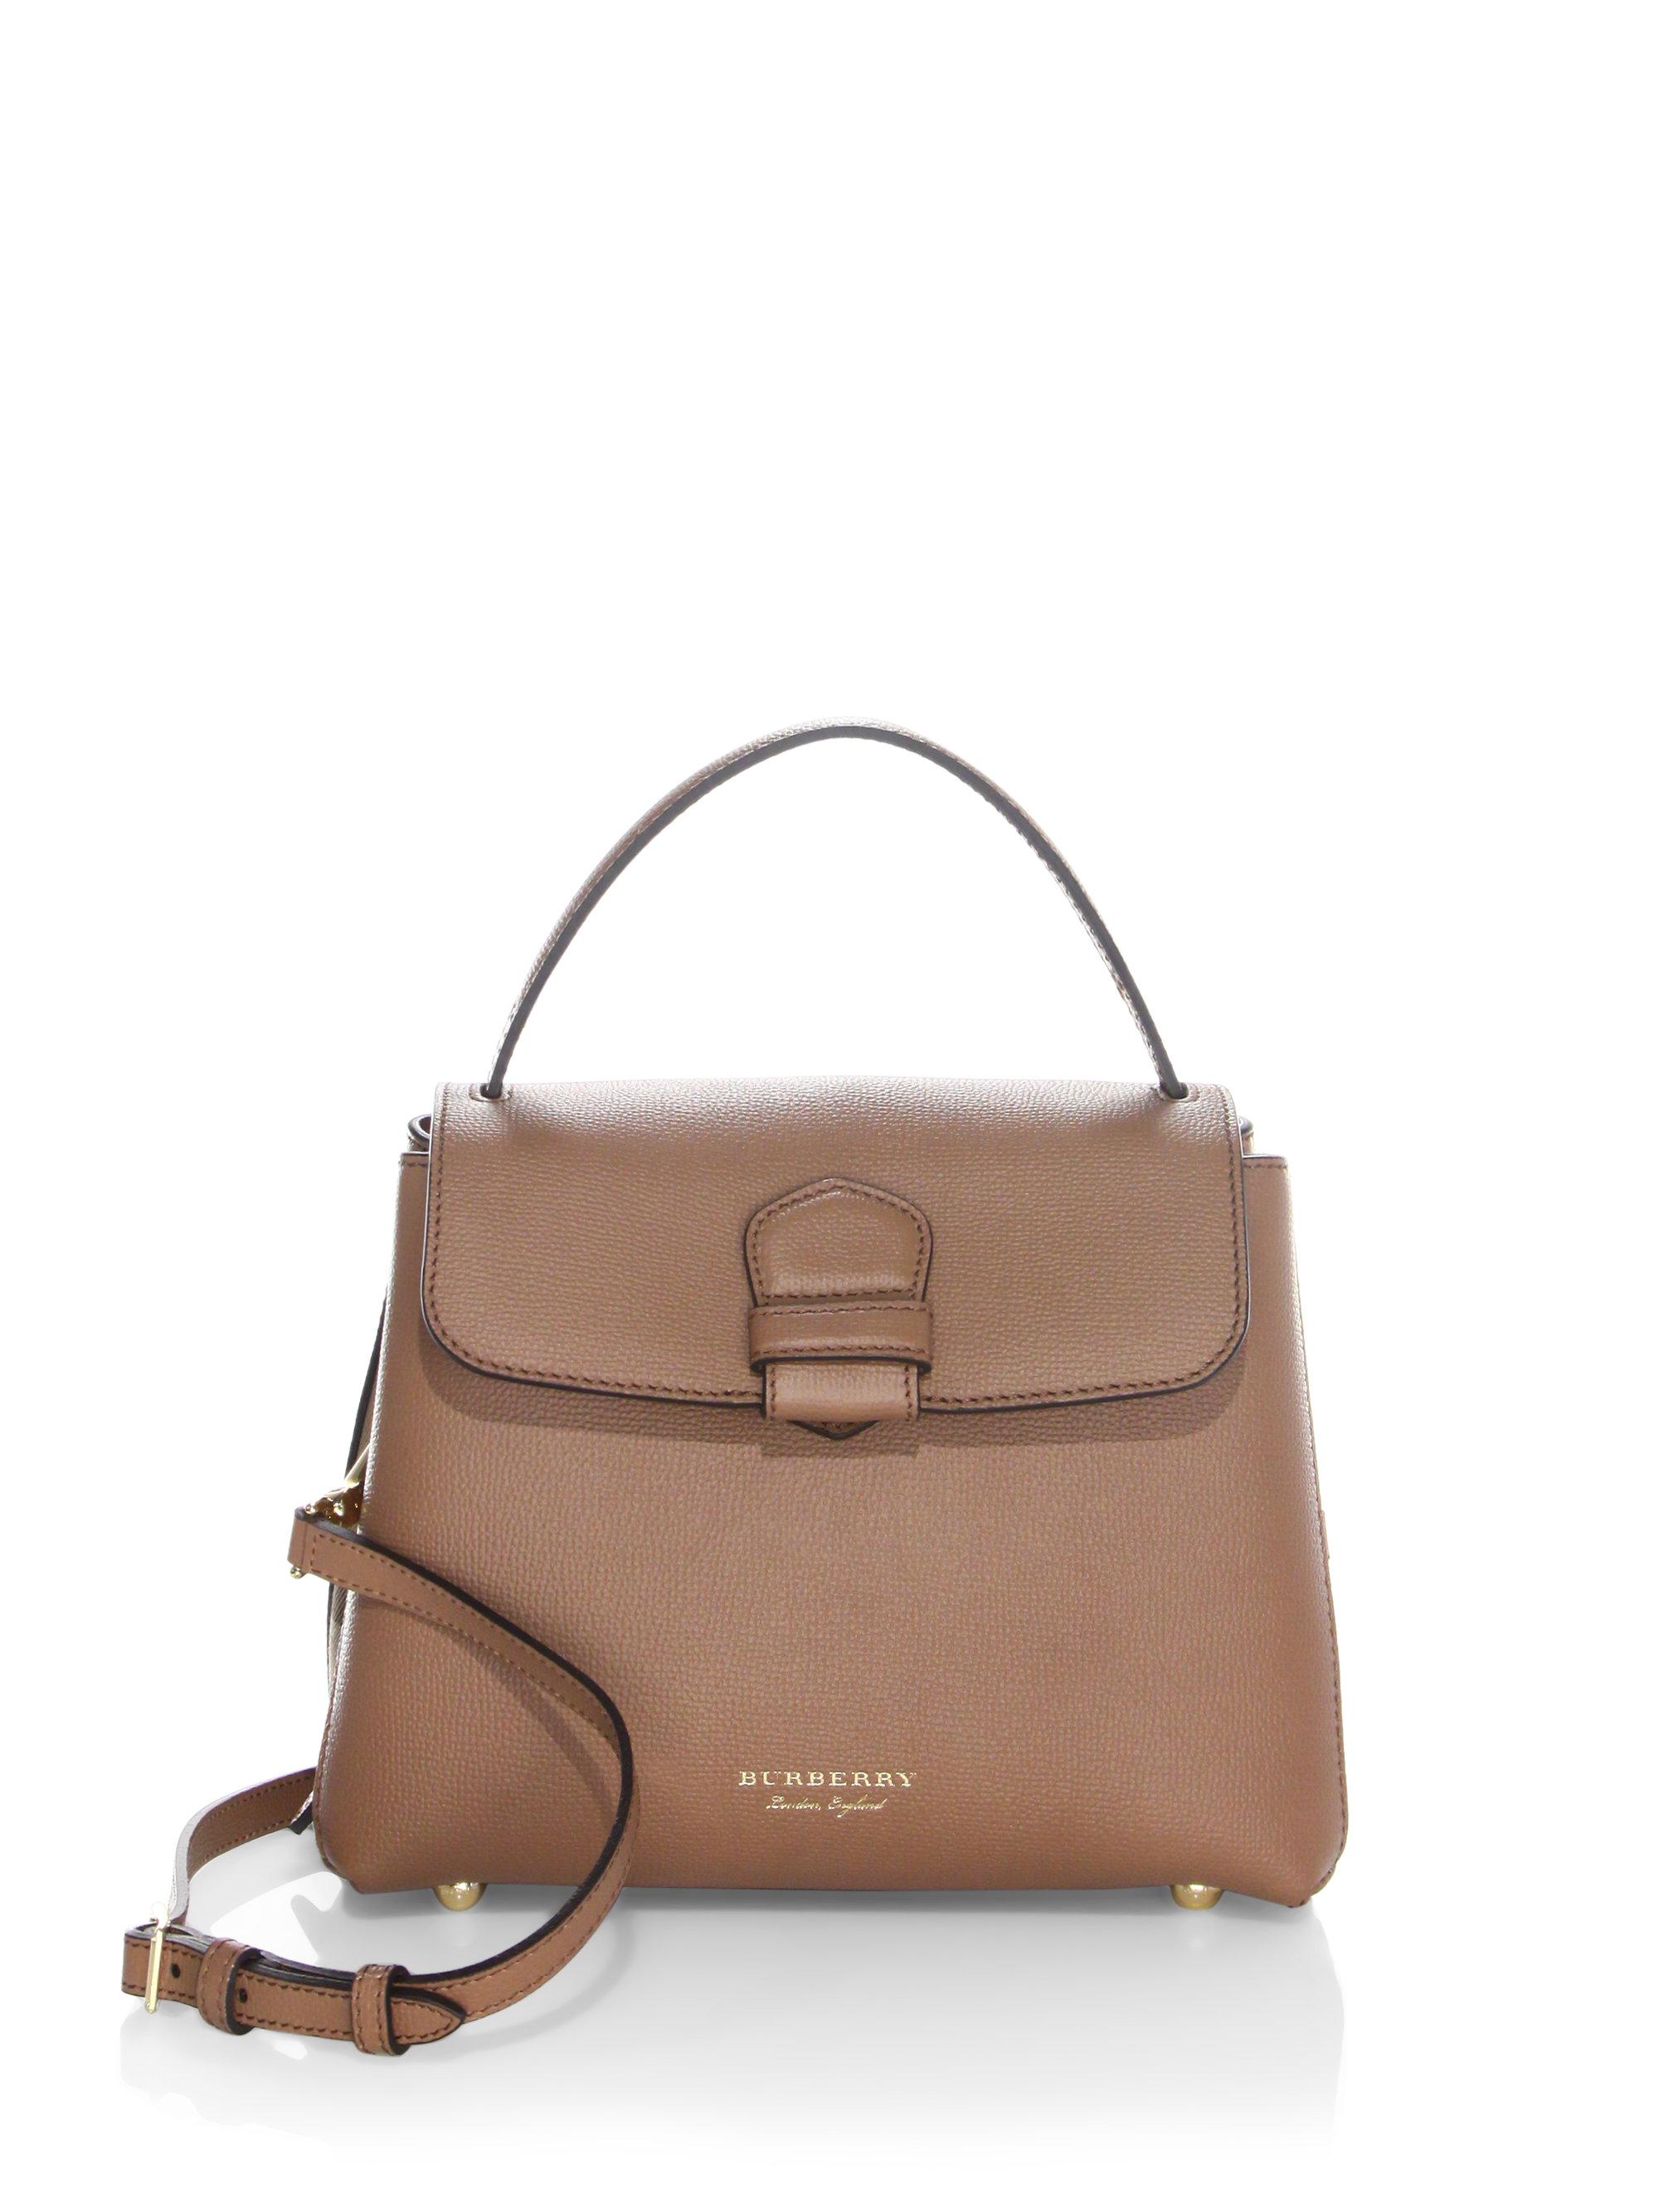 burberry camberley small leather tote